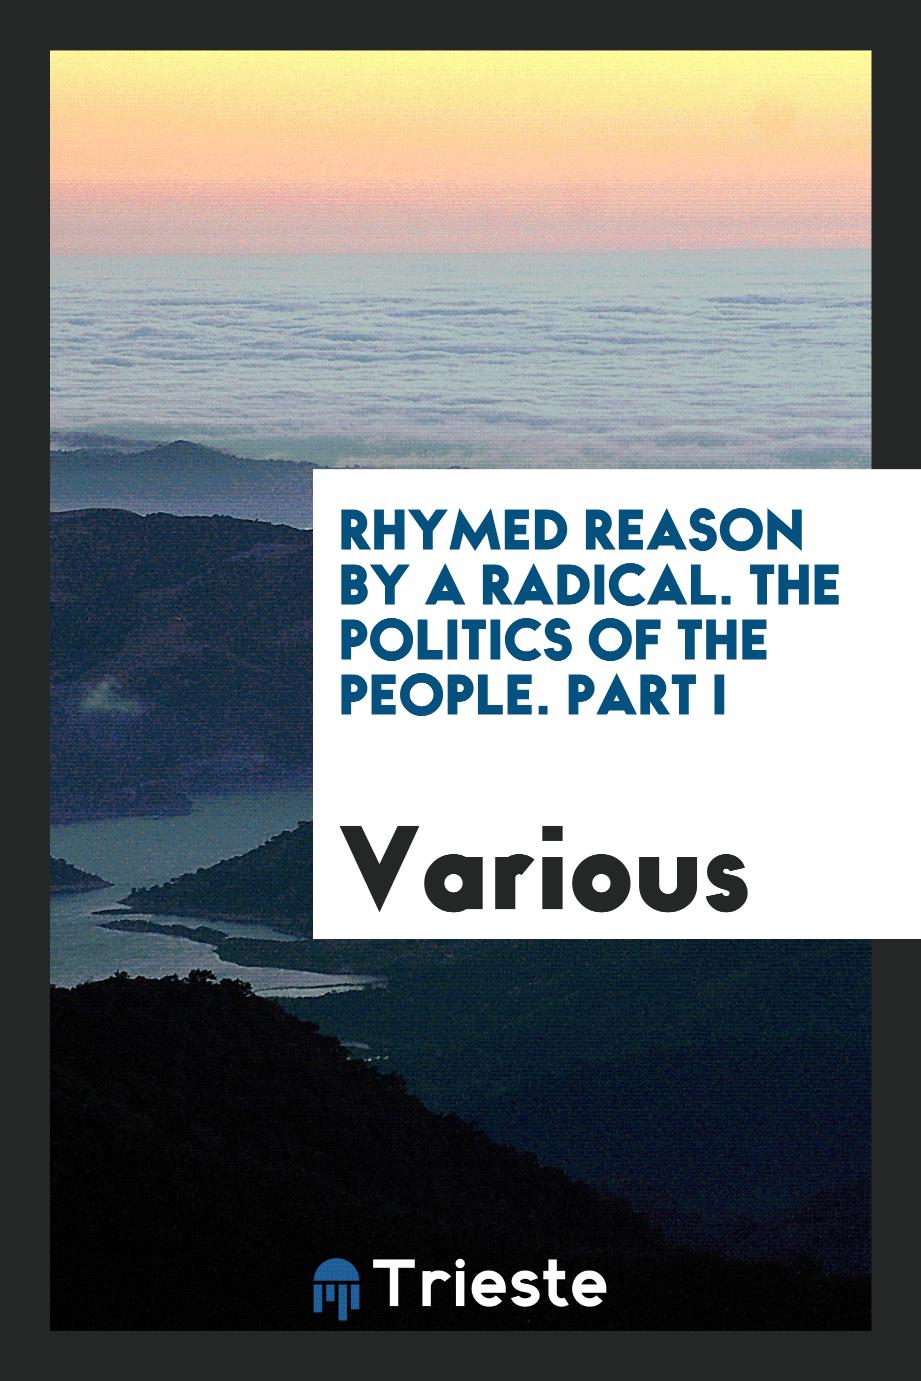 Rhymed Reason by a Radical. The Politics of the People. Part I